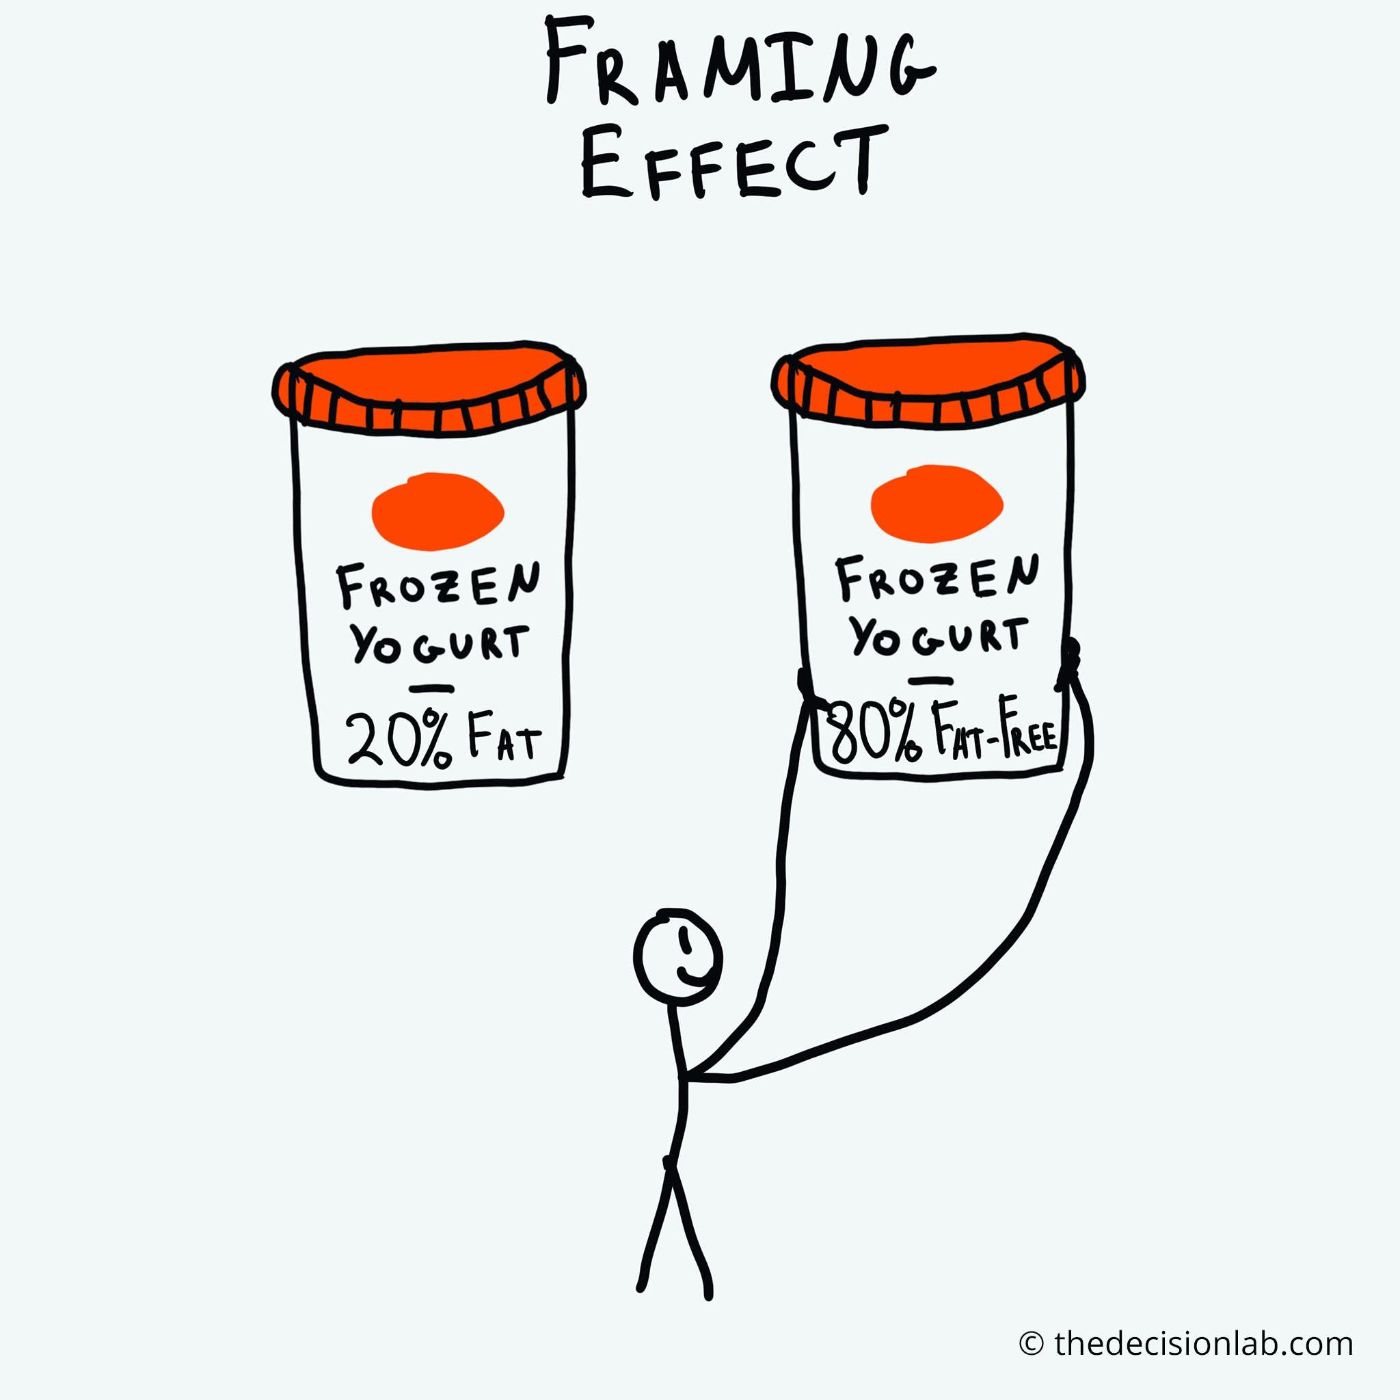 A depiction of the framing effect.